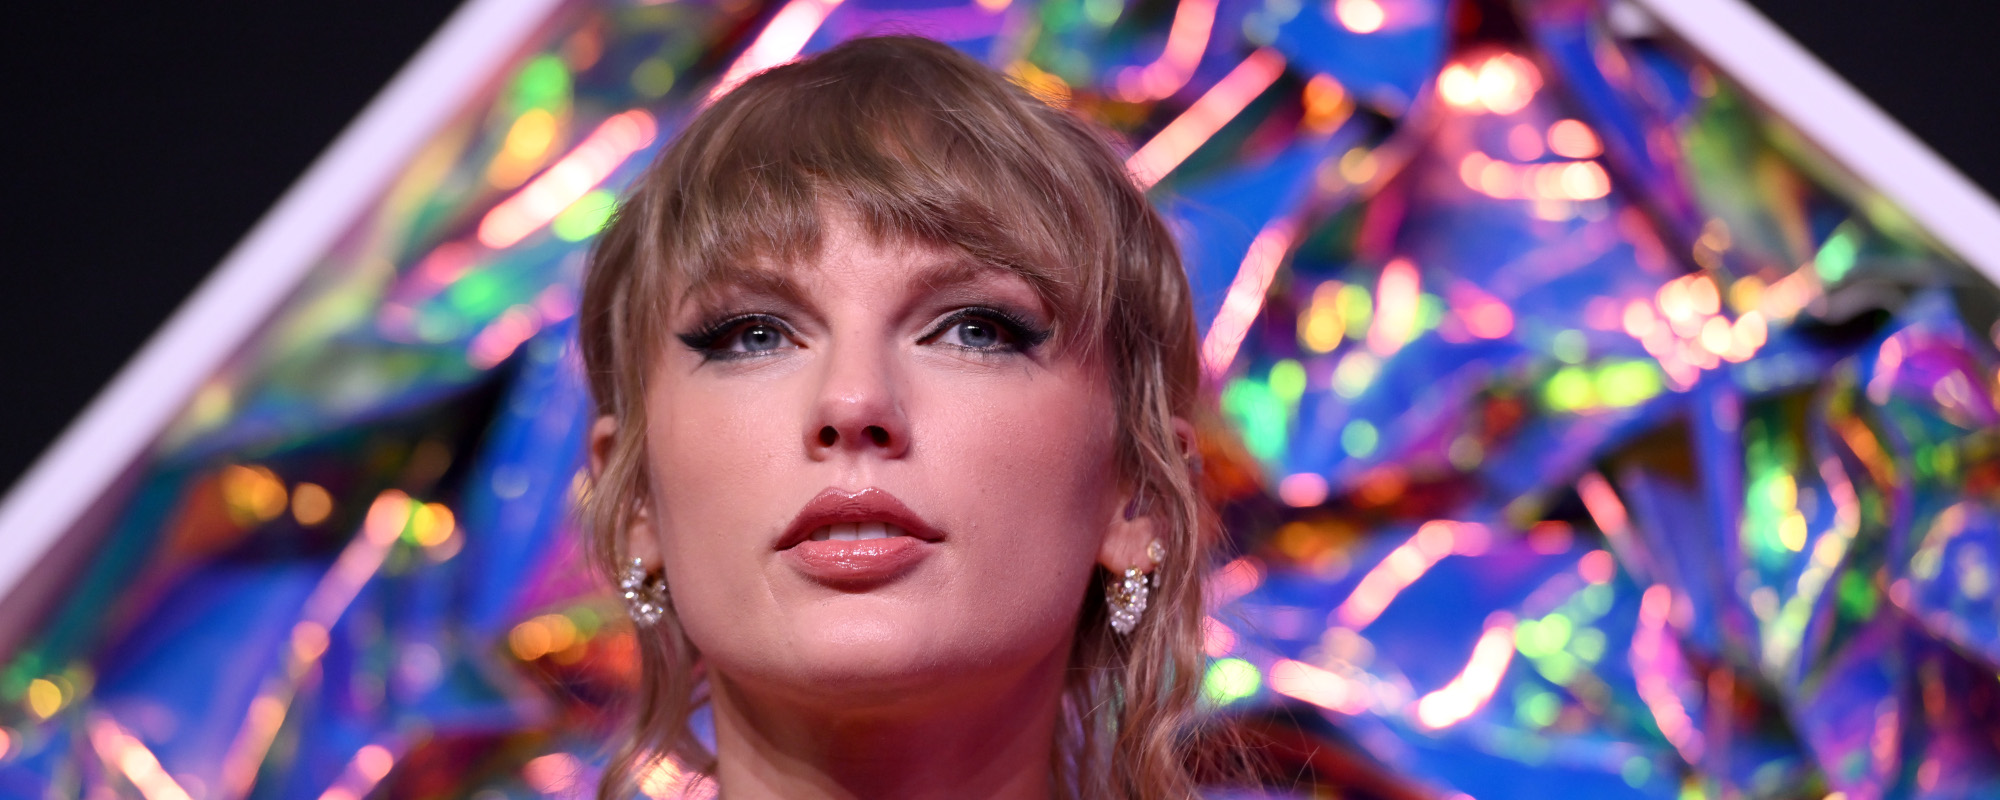 The Addictive Story Behind “Don’t Blame Me” by Taylor Swift